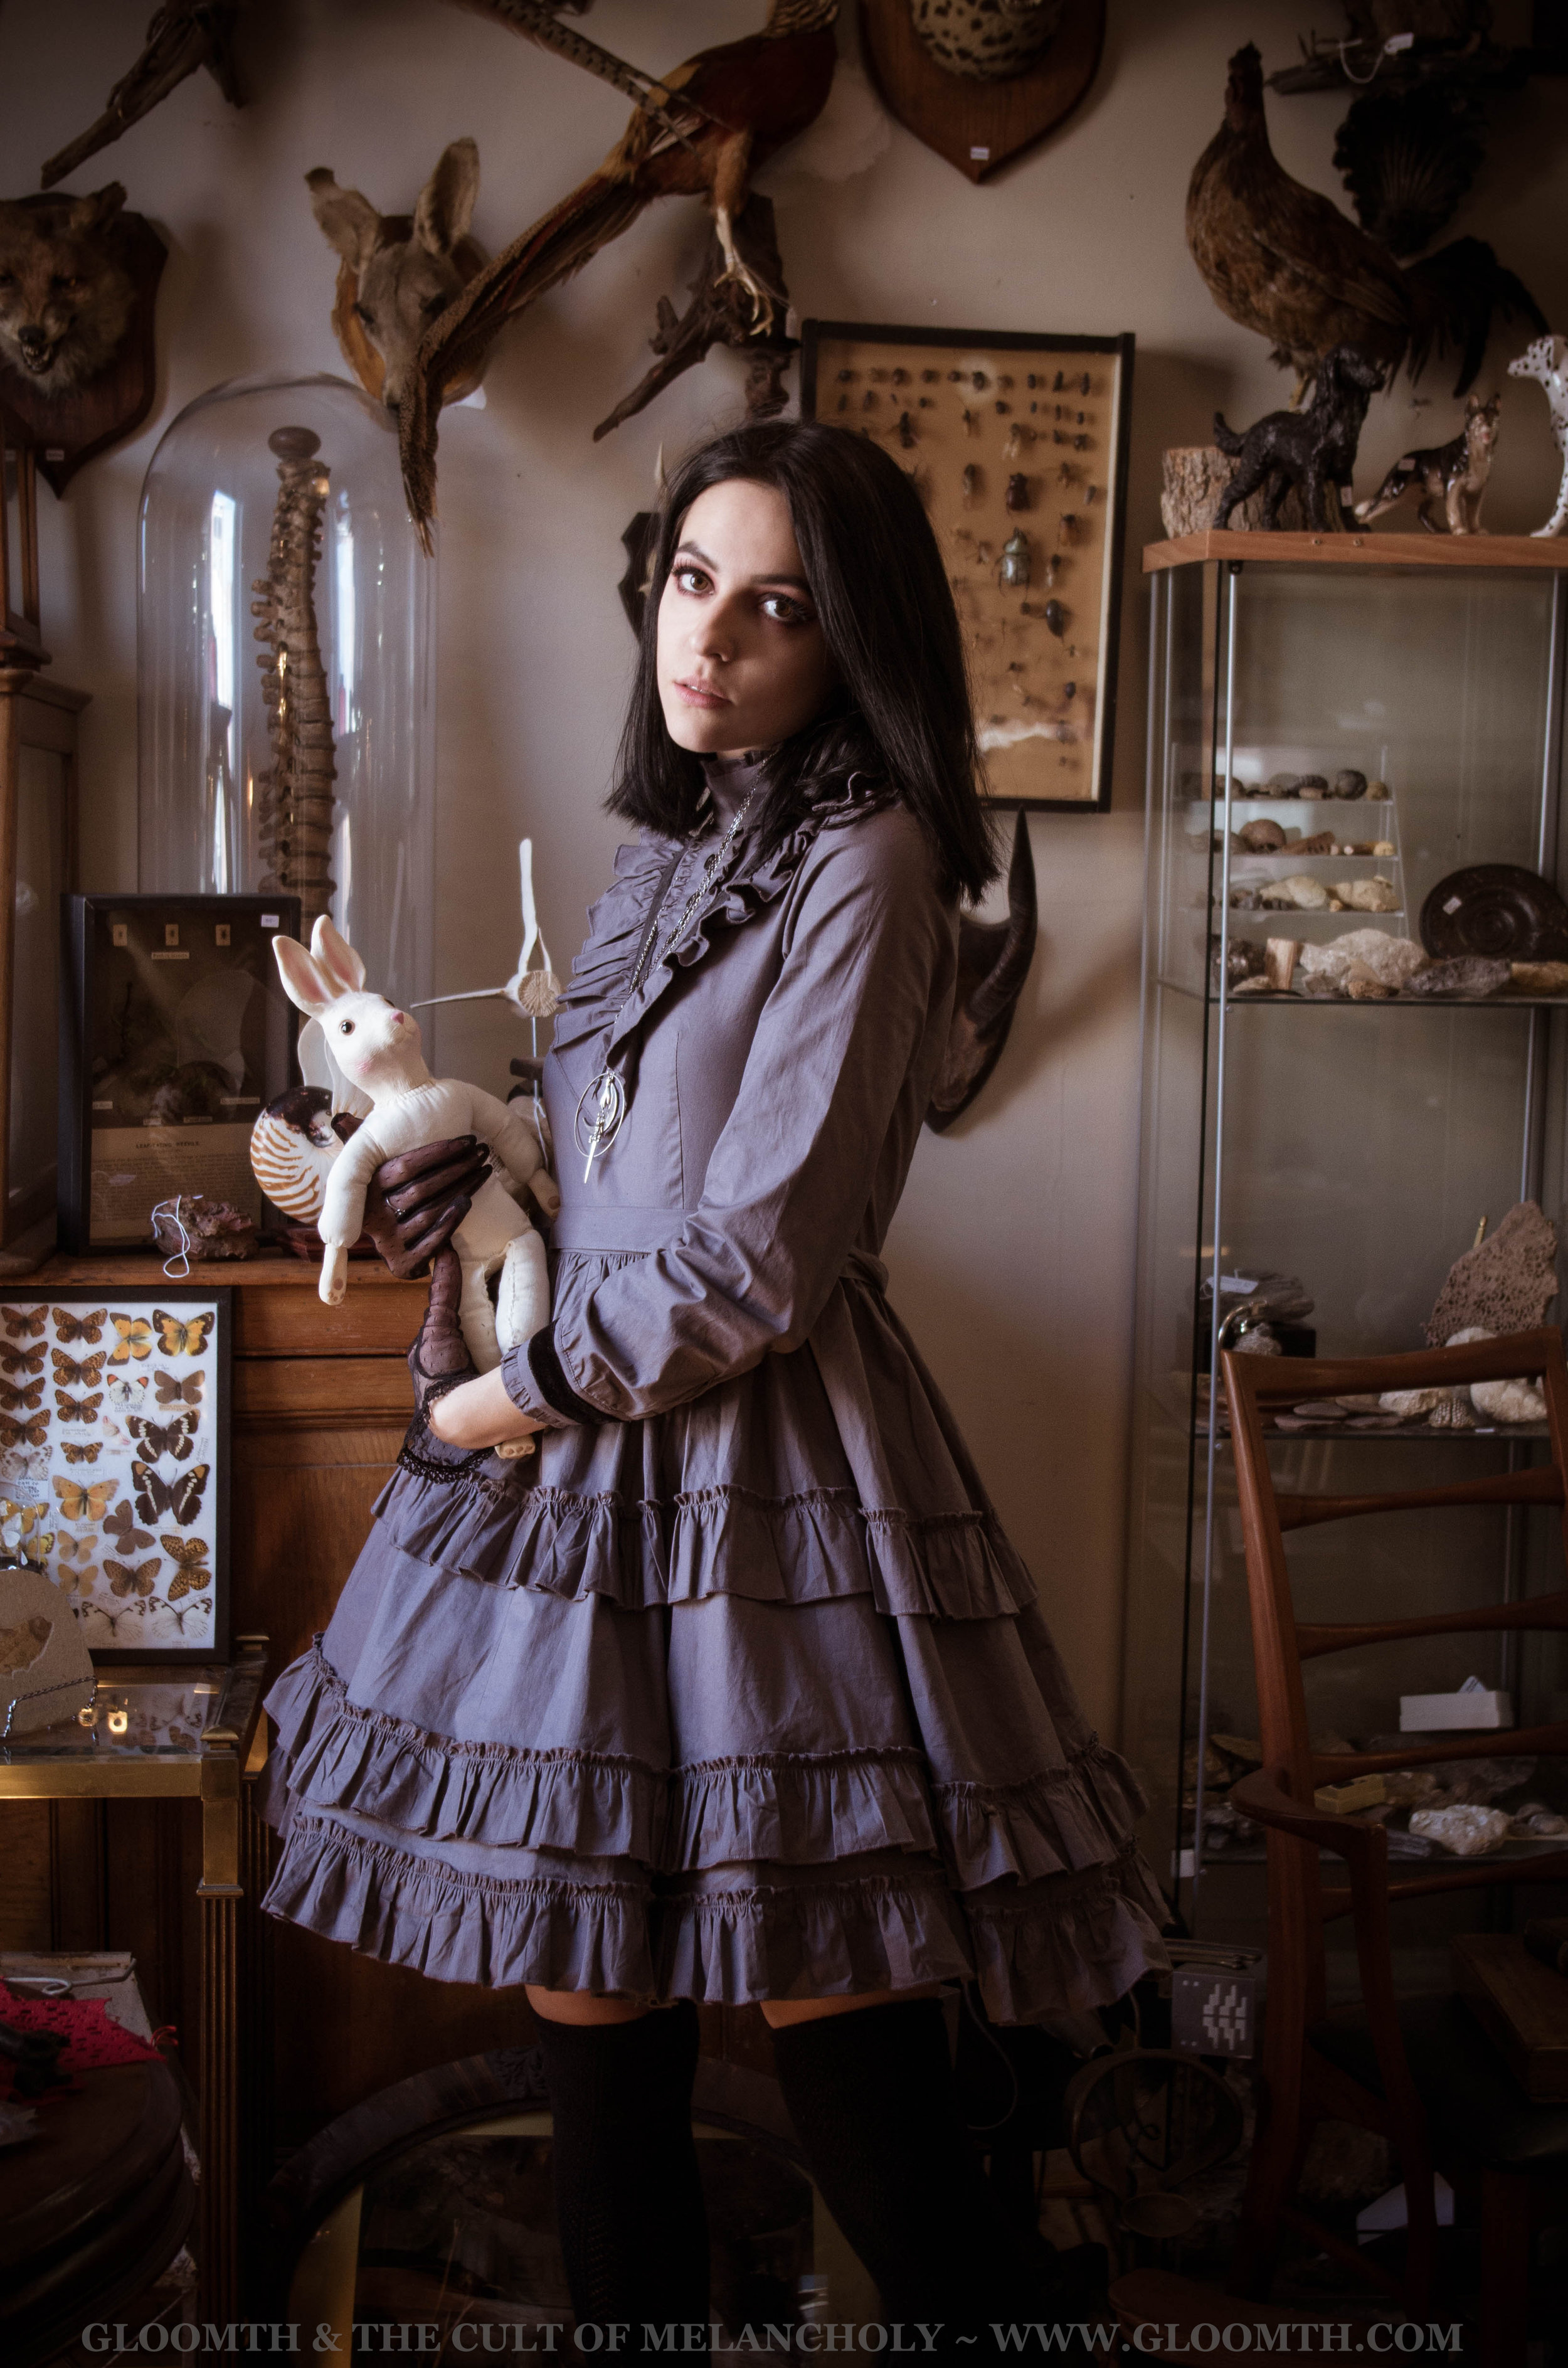 antique-cabinet-of-curiousities-gloomth-lolita-gothic-fashion7.jpg